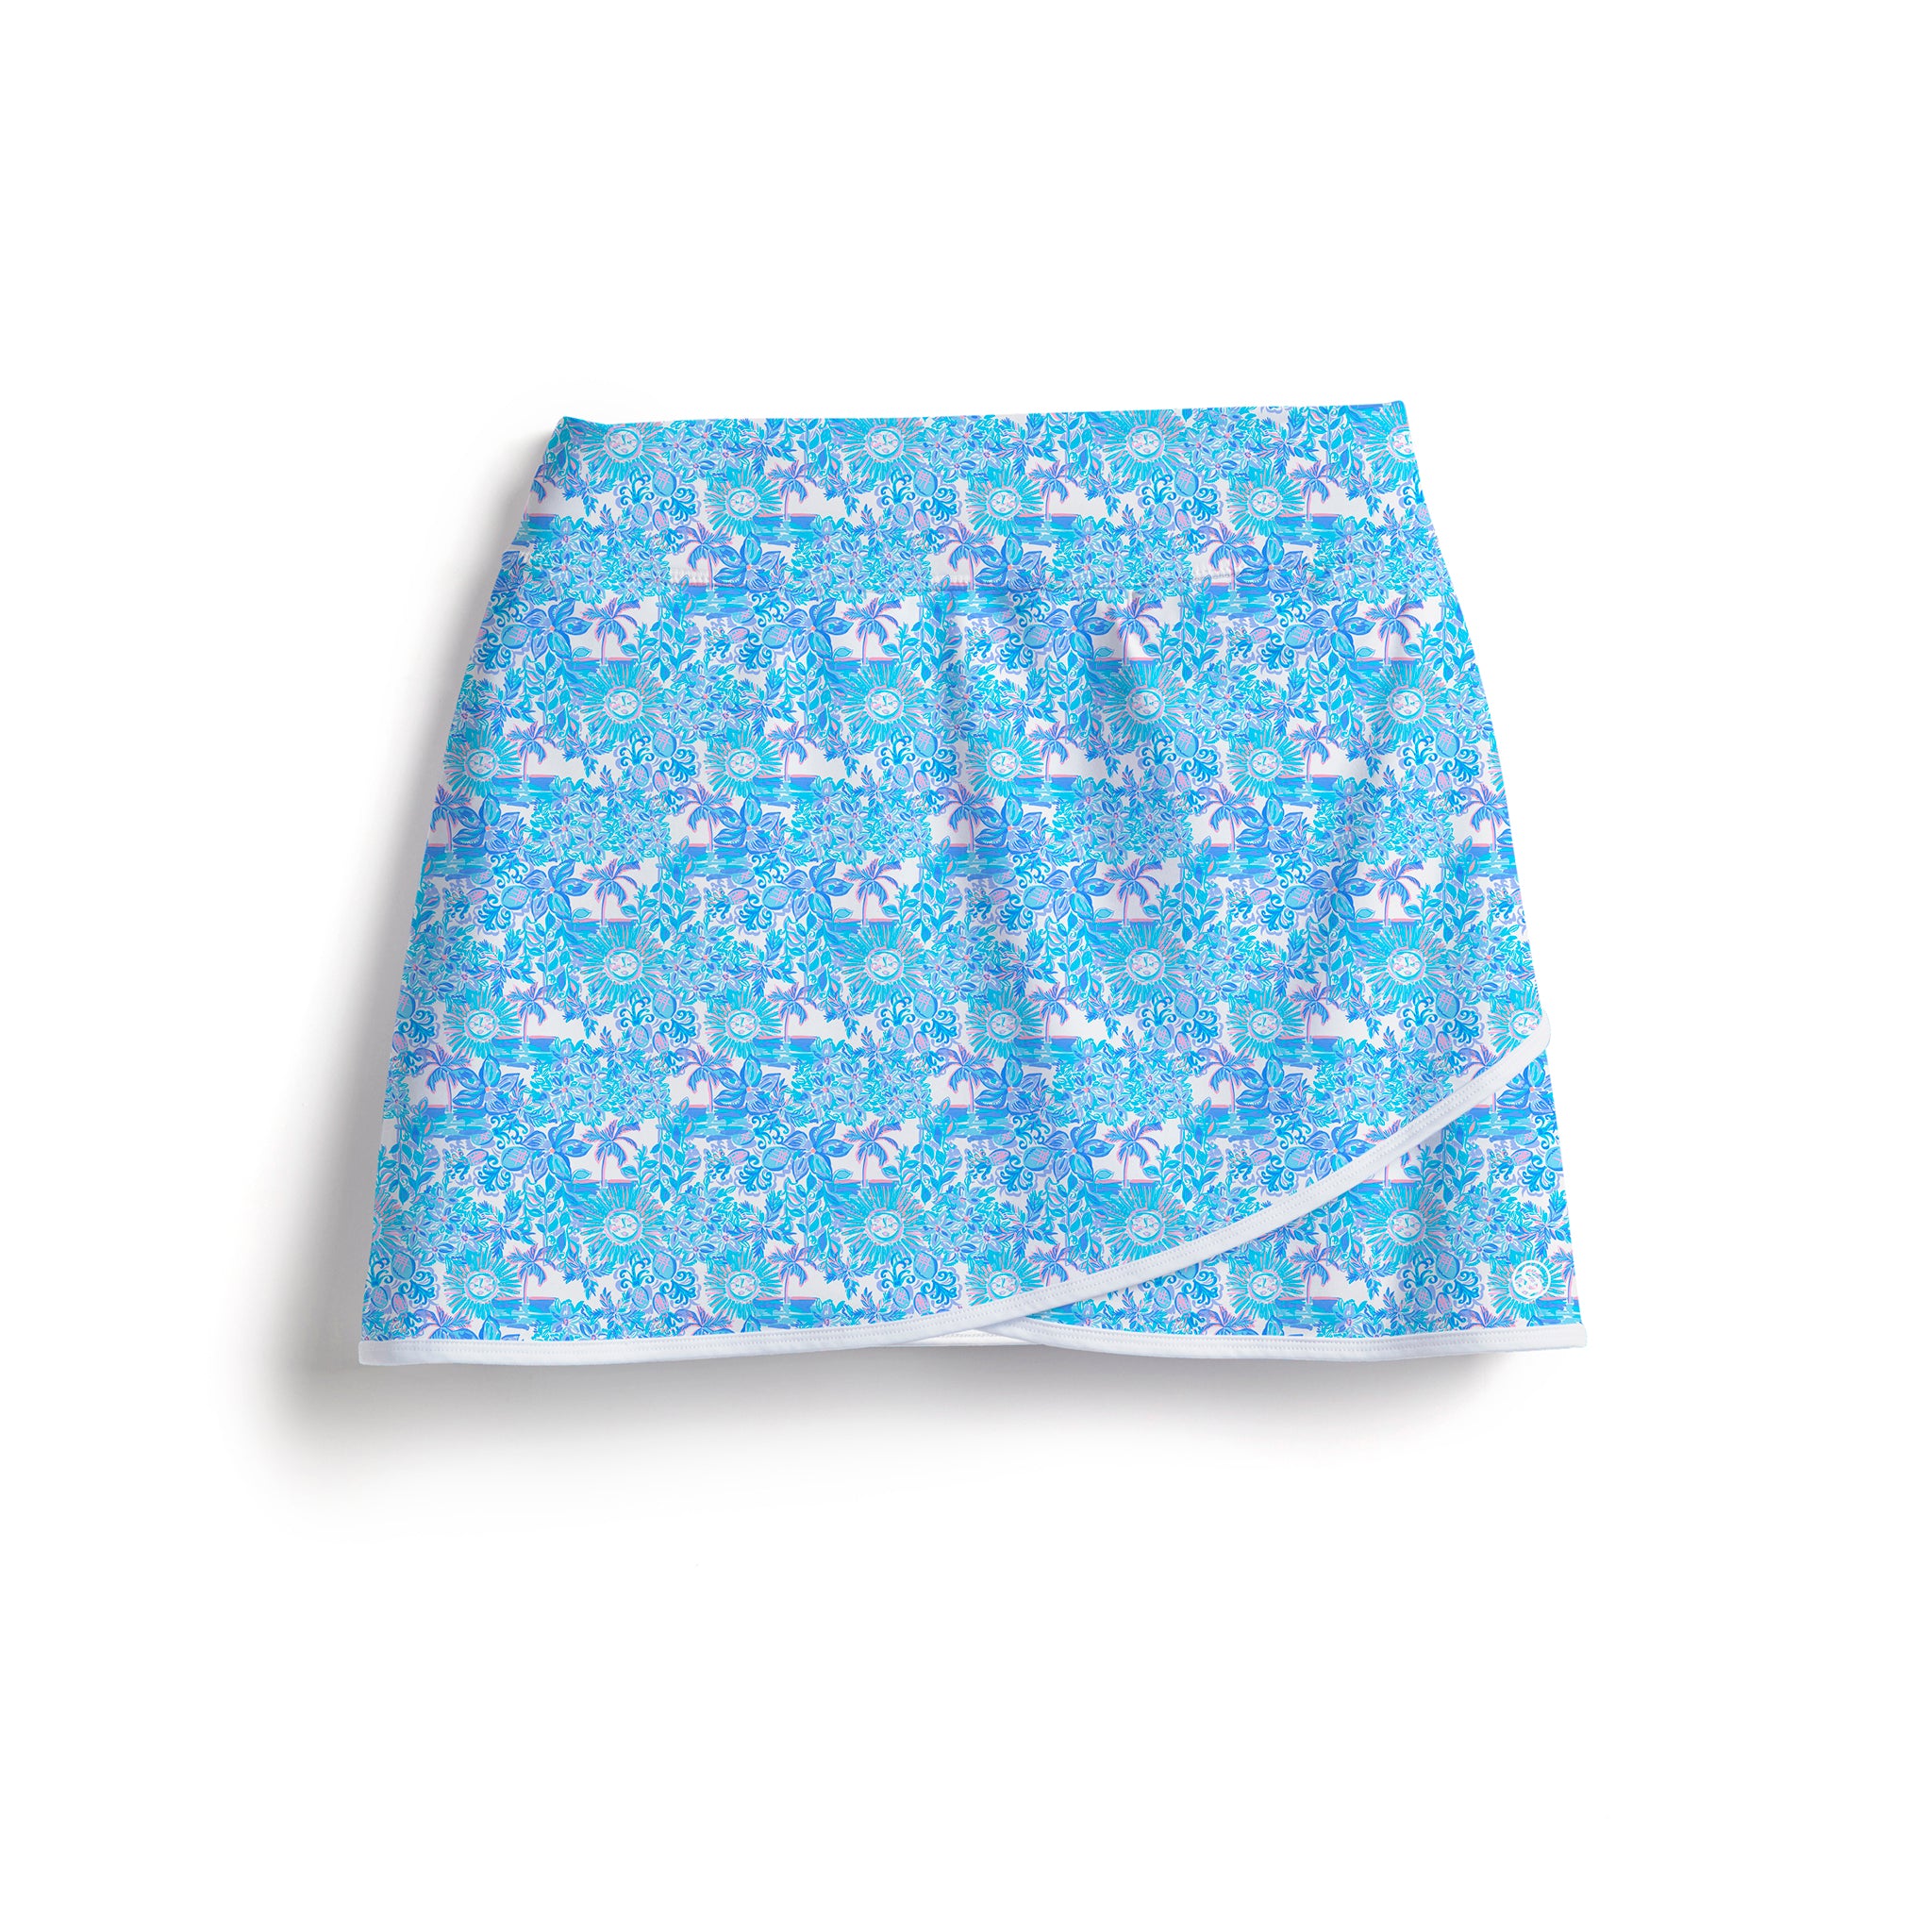 Scales Daily Sunshine Iconic Skort 14" in White / Powder Blue Size L